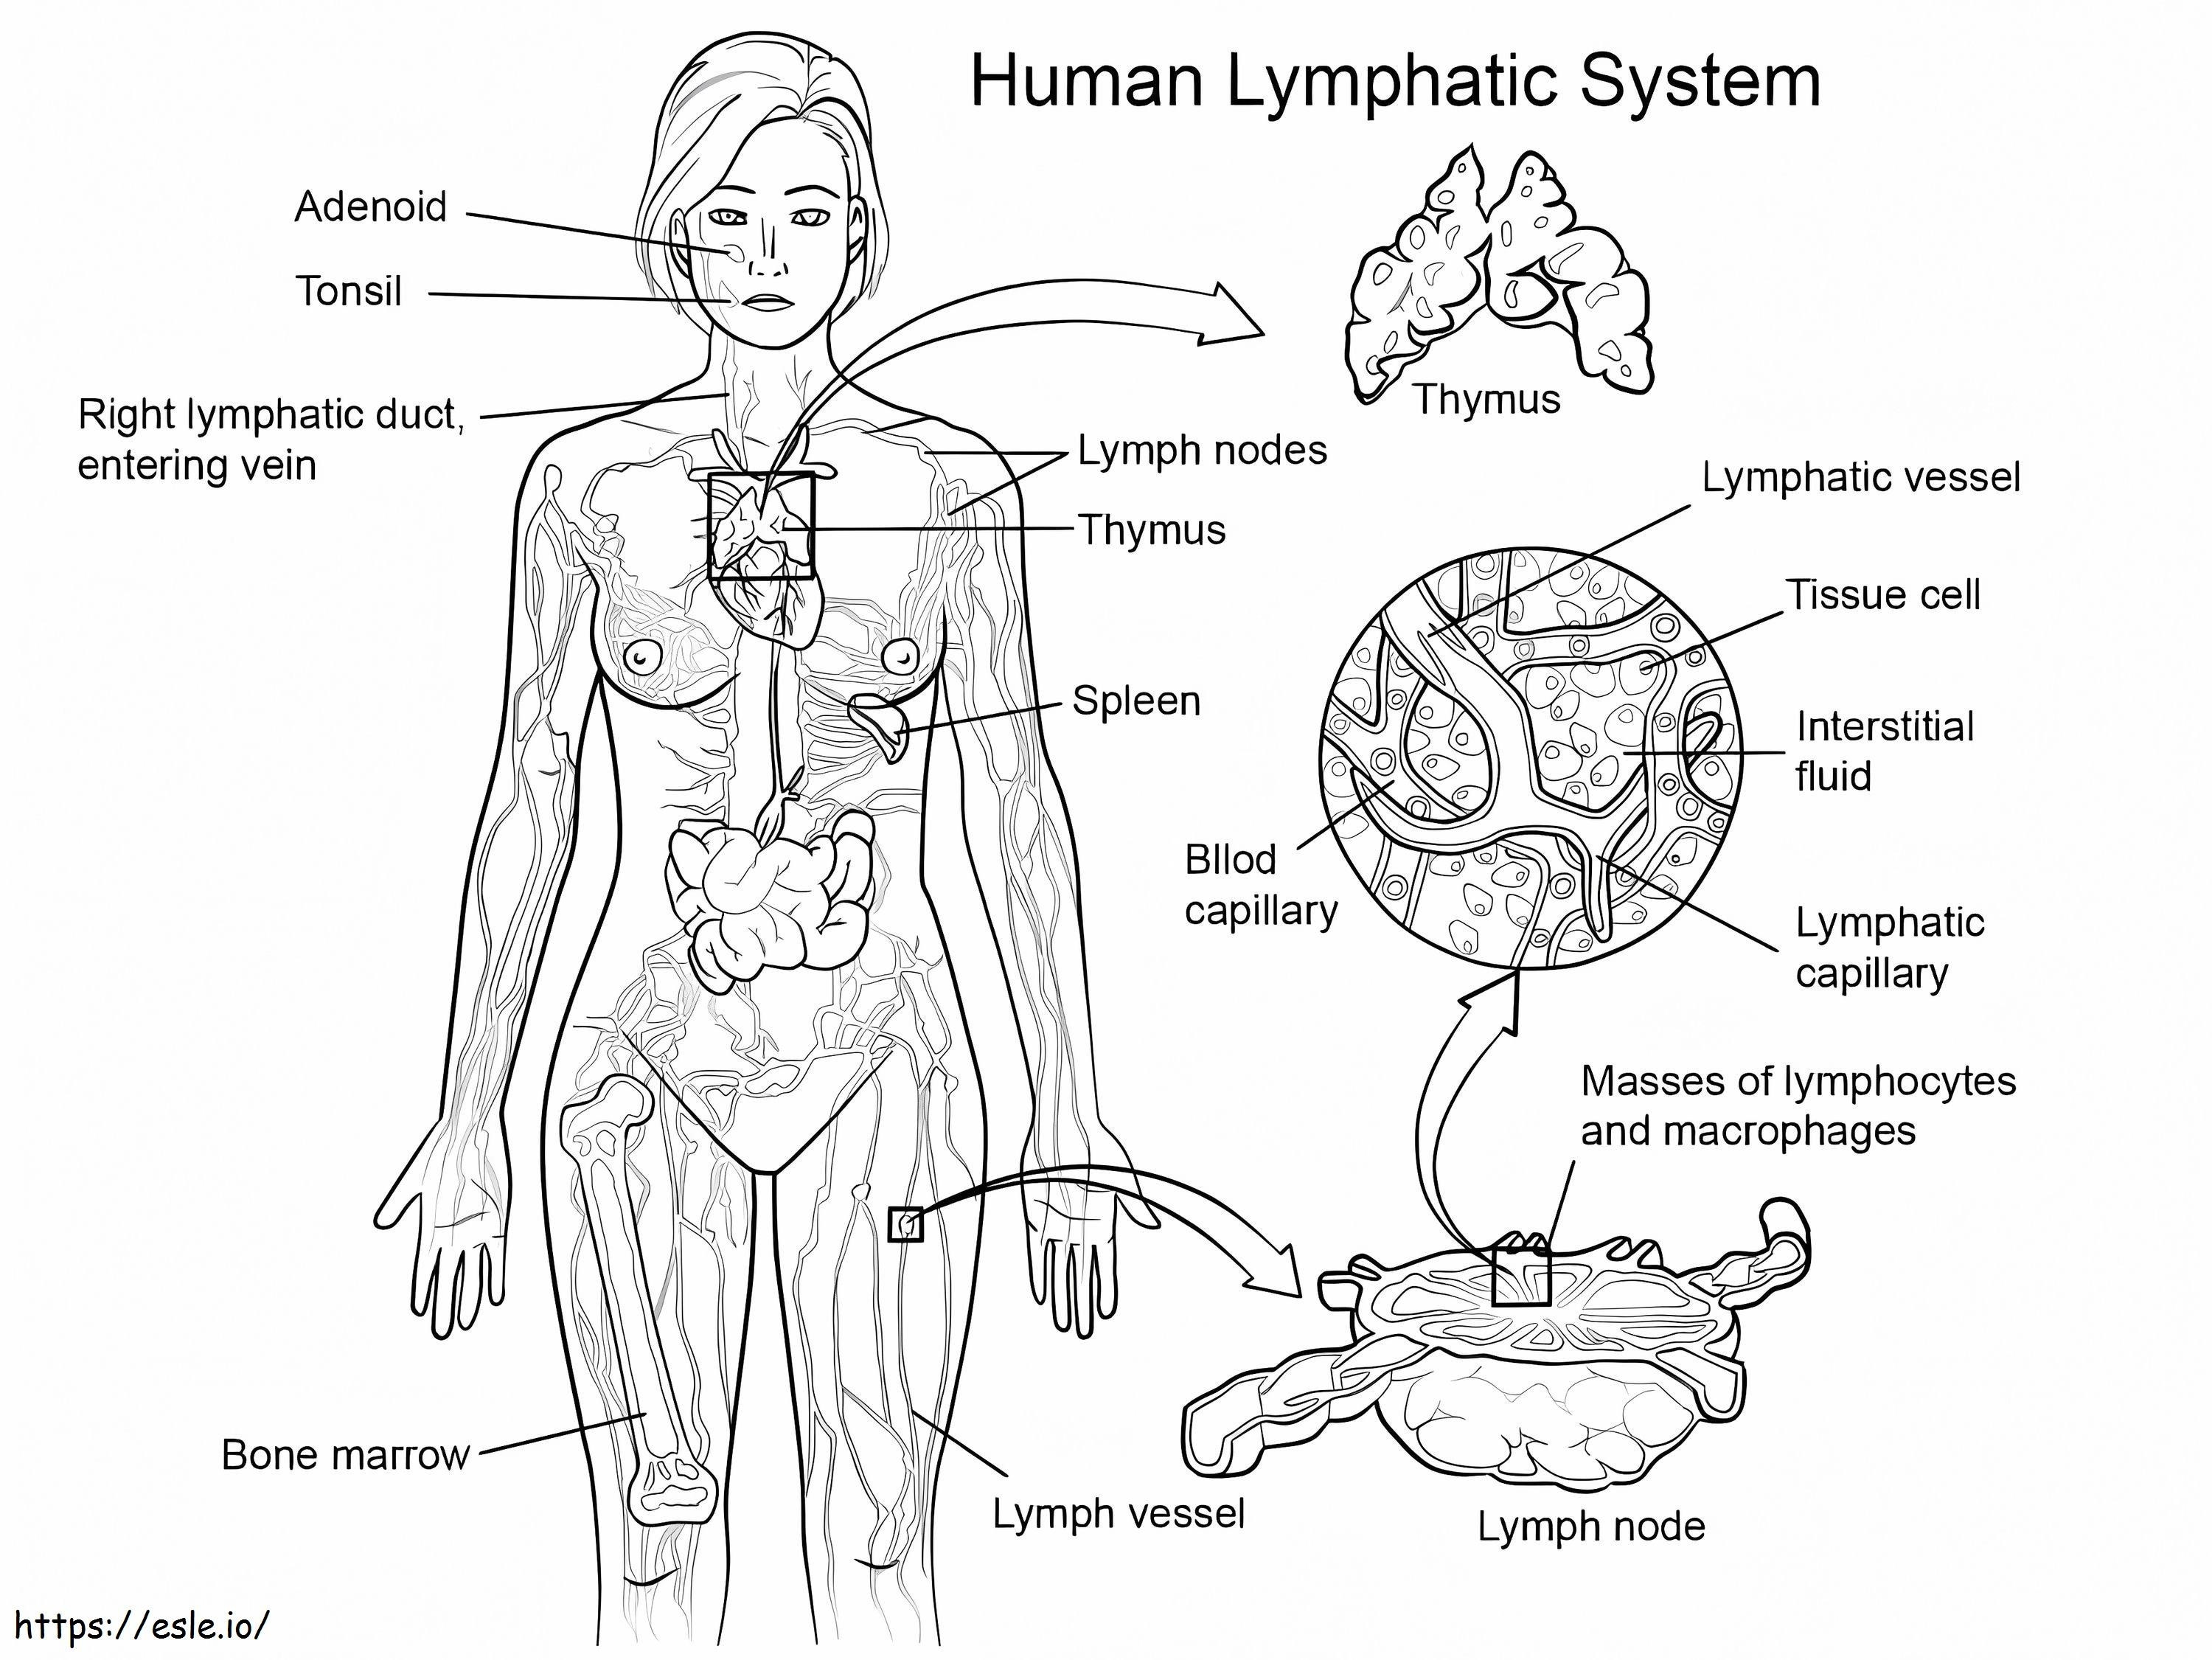 Human Lymphatic System coloring page